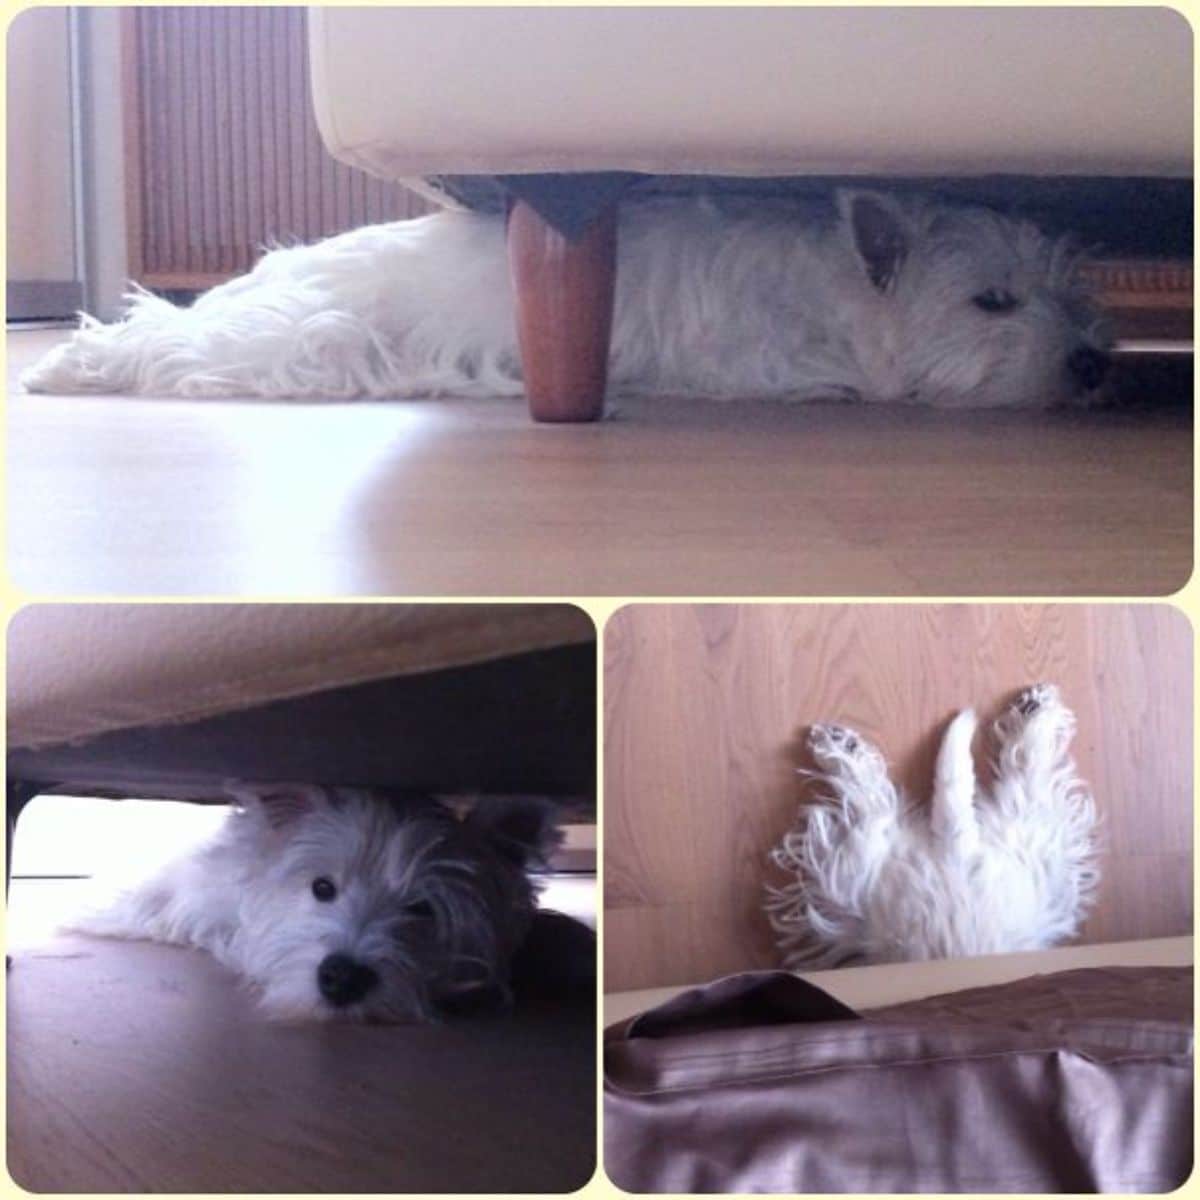 3 photos of a white fluffy dog under a chair with the back half sticking out